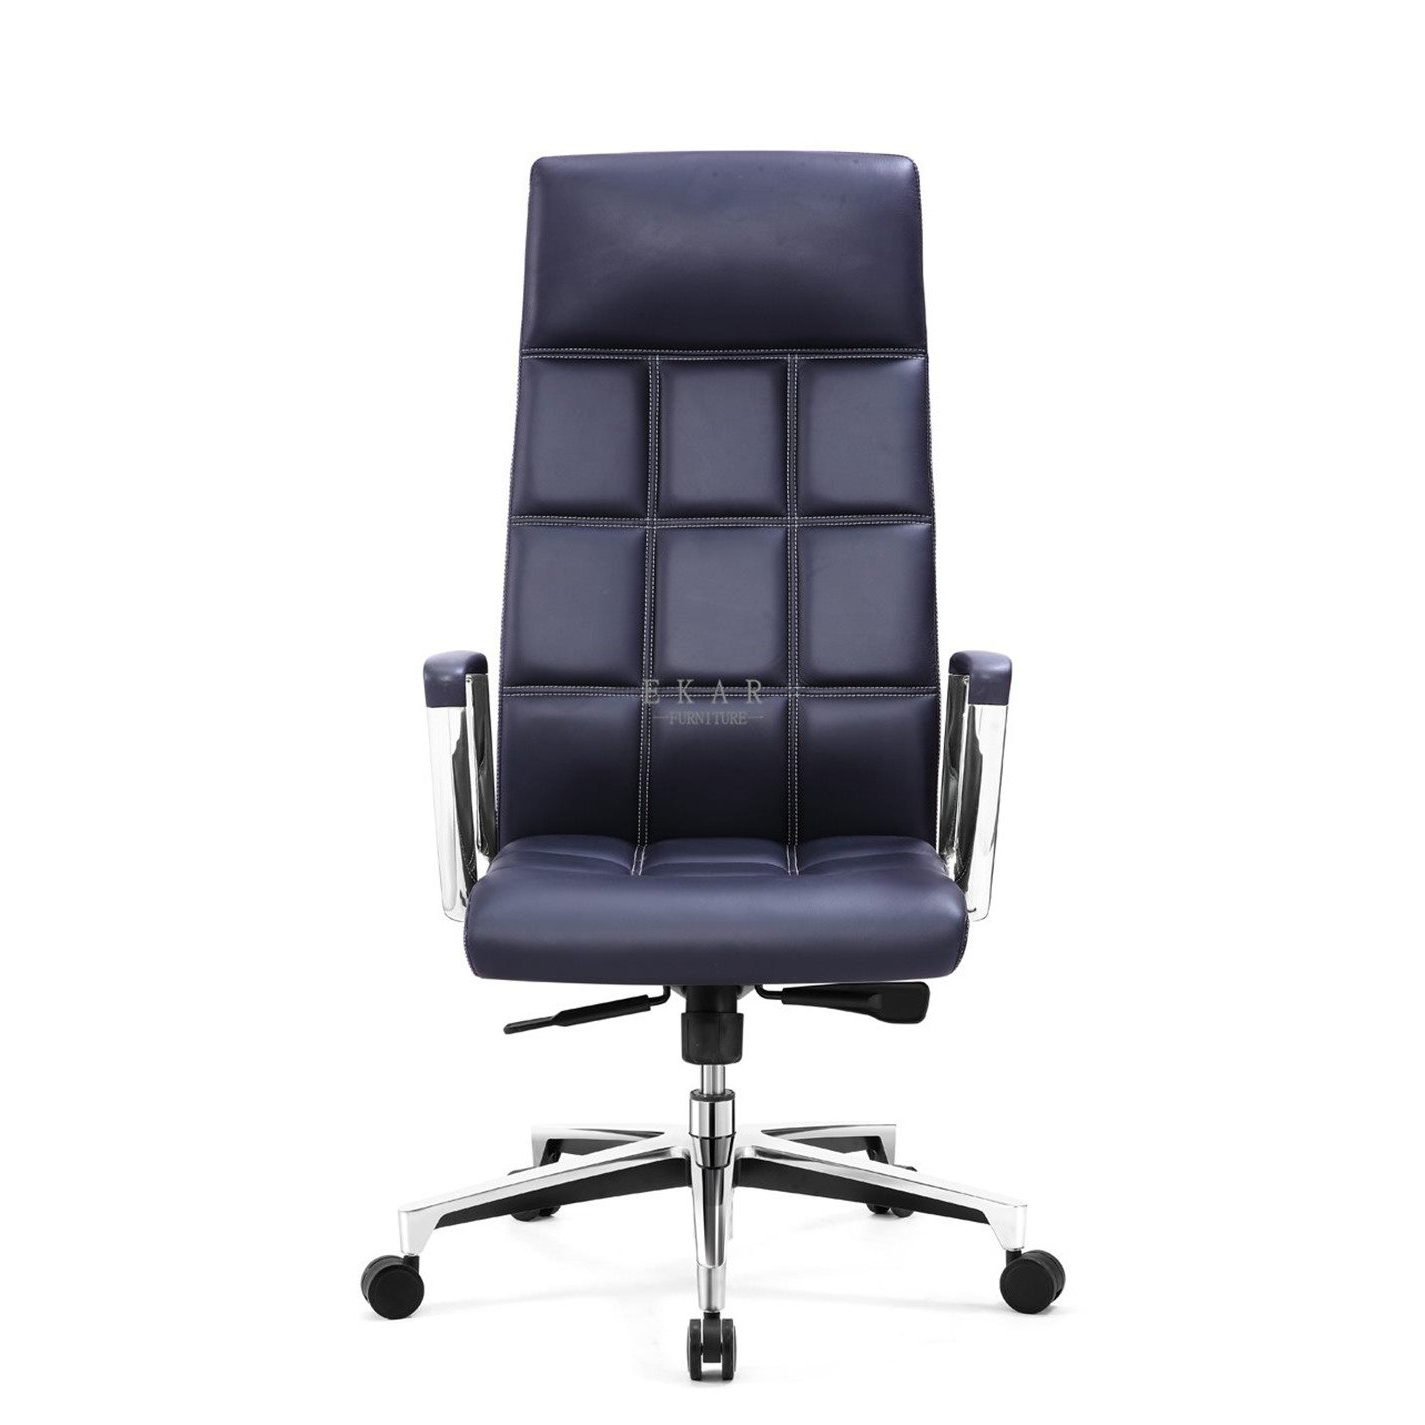 Imported Leather Office Chair with Casters - Premium Comfort and Mobility